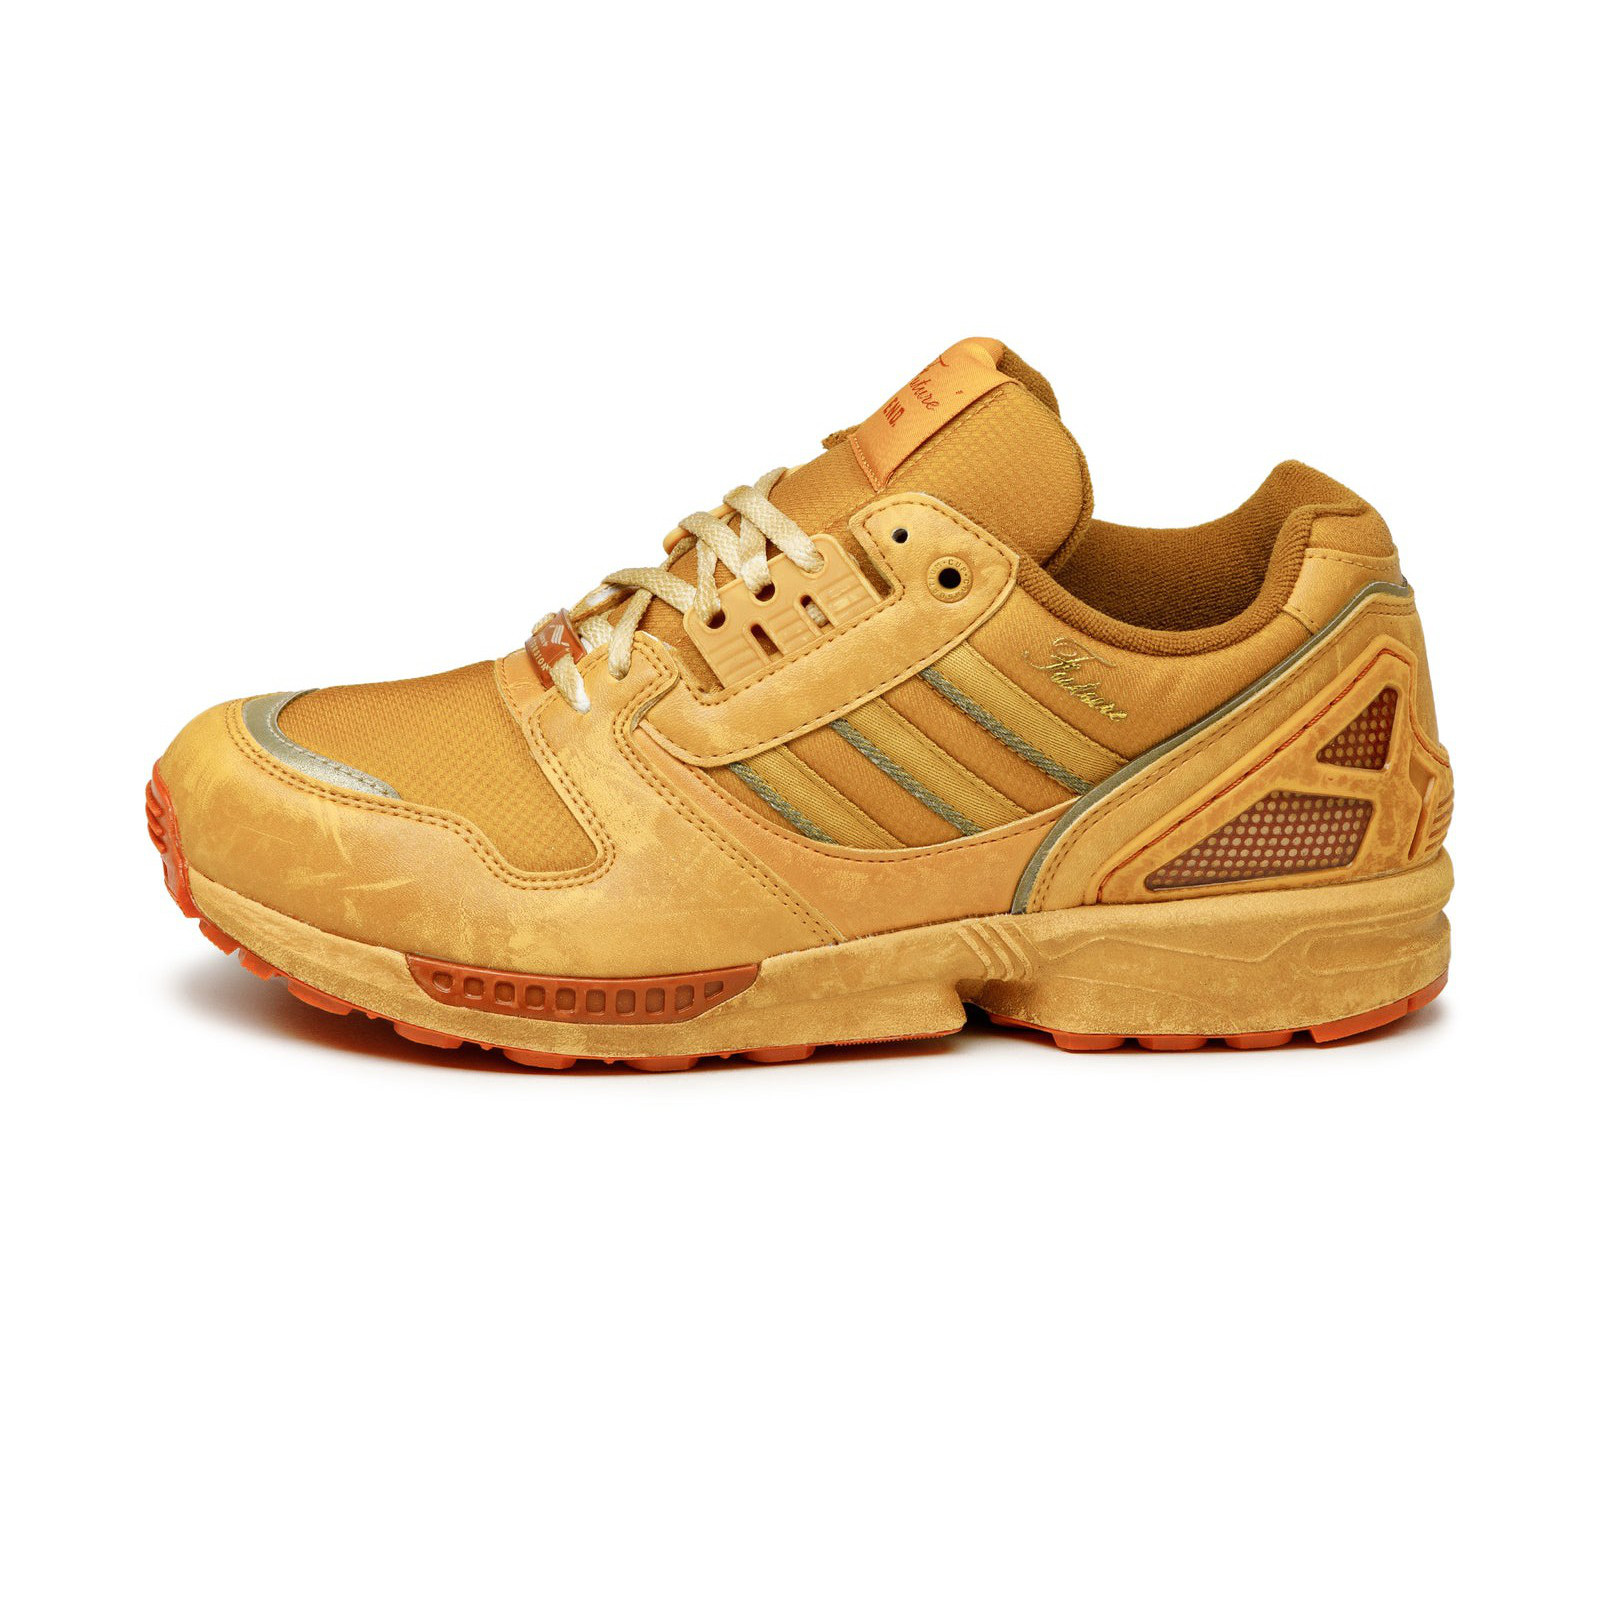 Adidas x END.
ZX 8000
« Core Gold »